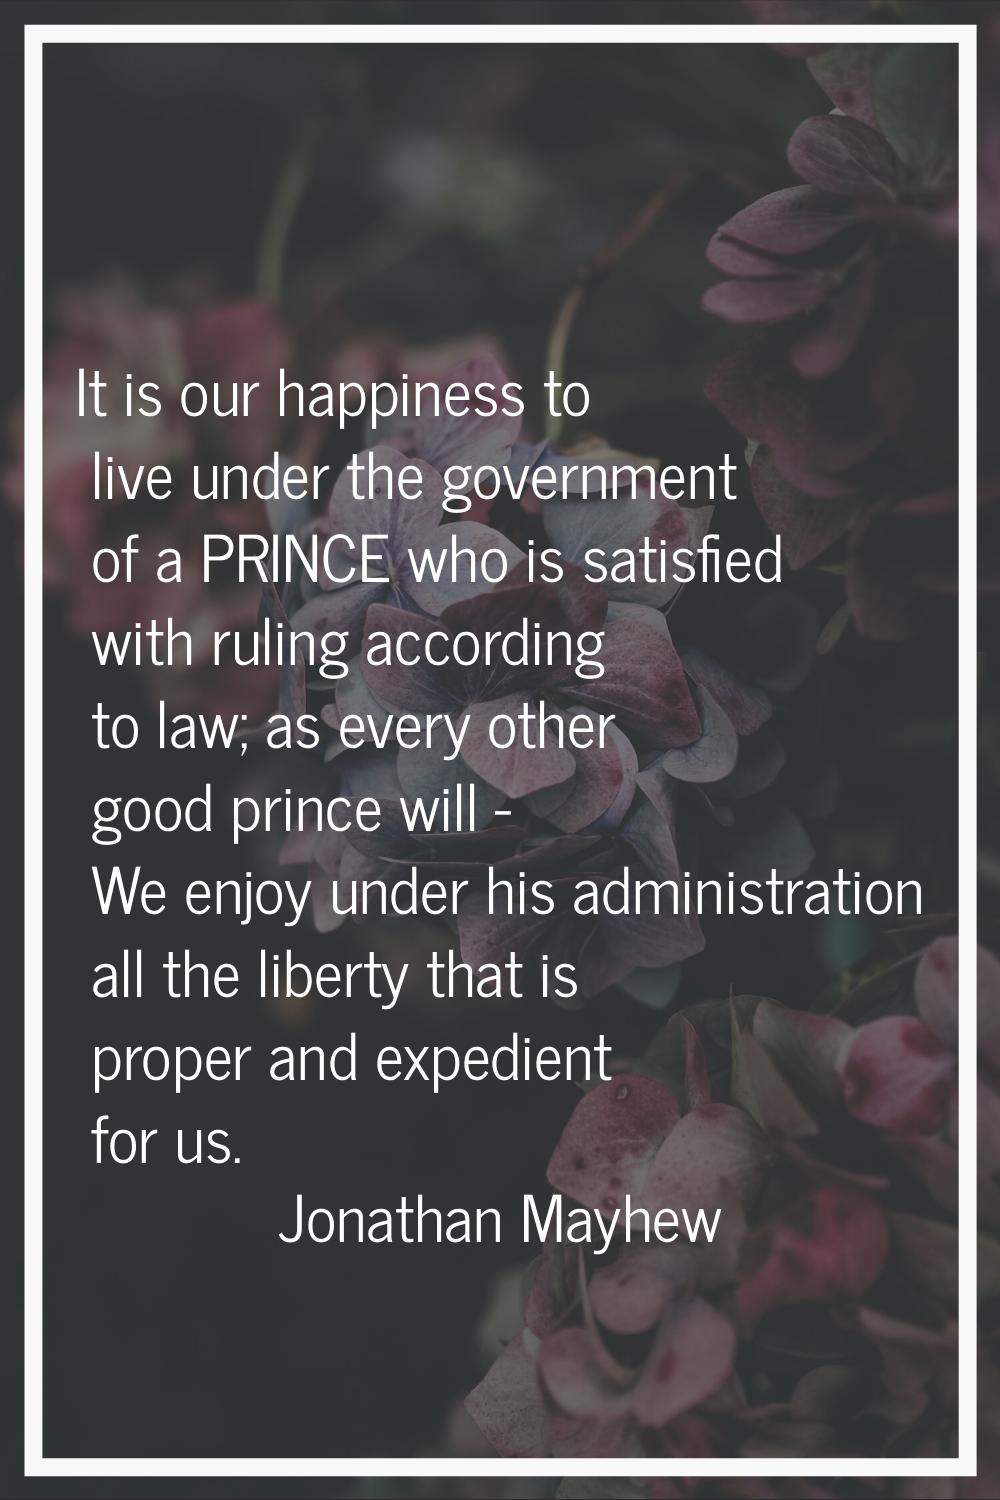 It is our happiness to live under the government of a PRINCE who is satisfied with ruling according